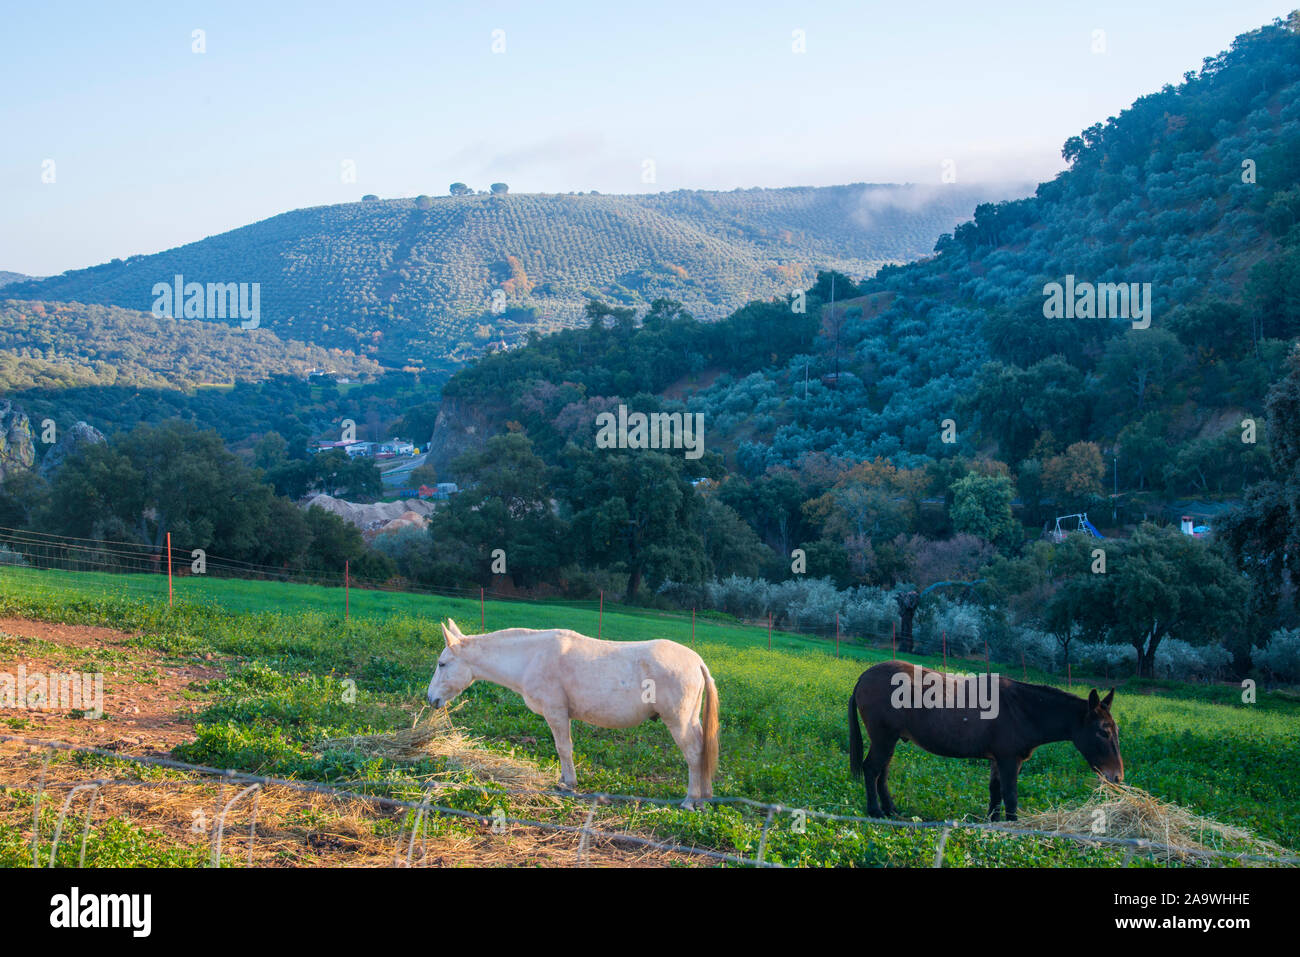 Two mules grazing and olive groves. Fuencaliente, Ciudad Real province, Castilla La Mancha, Spain. Stock Photo